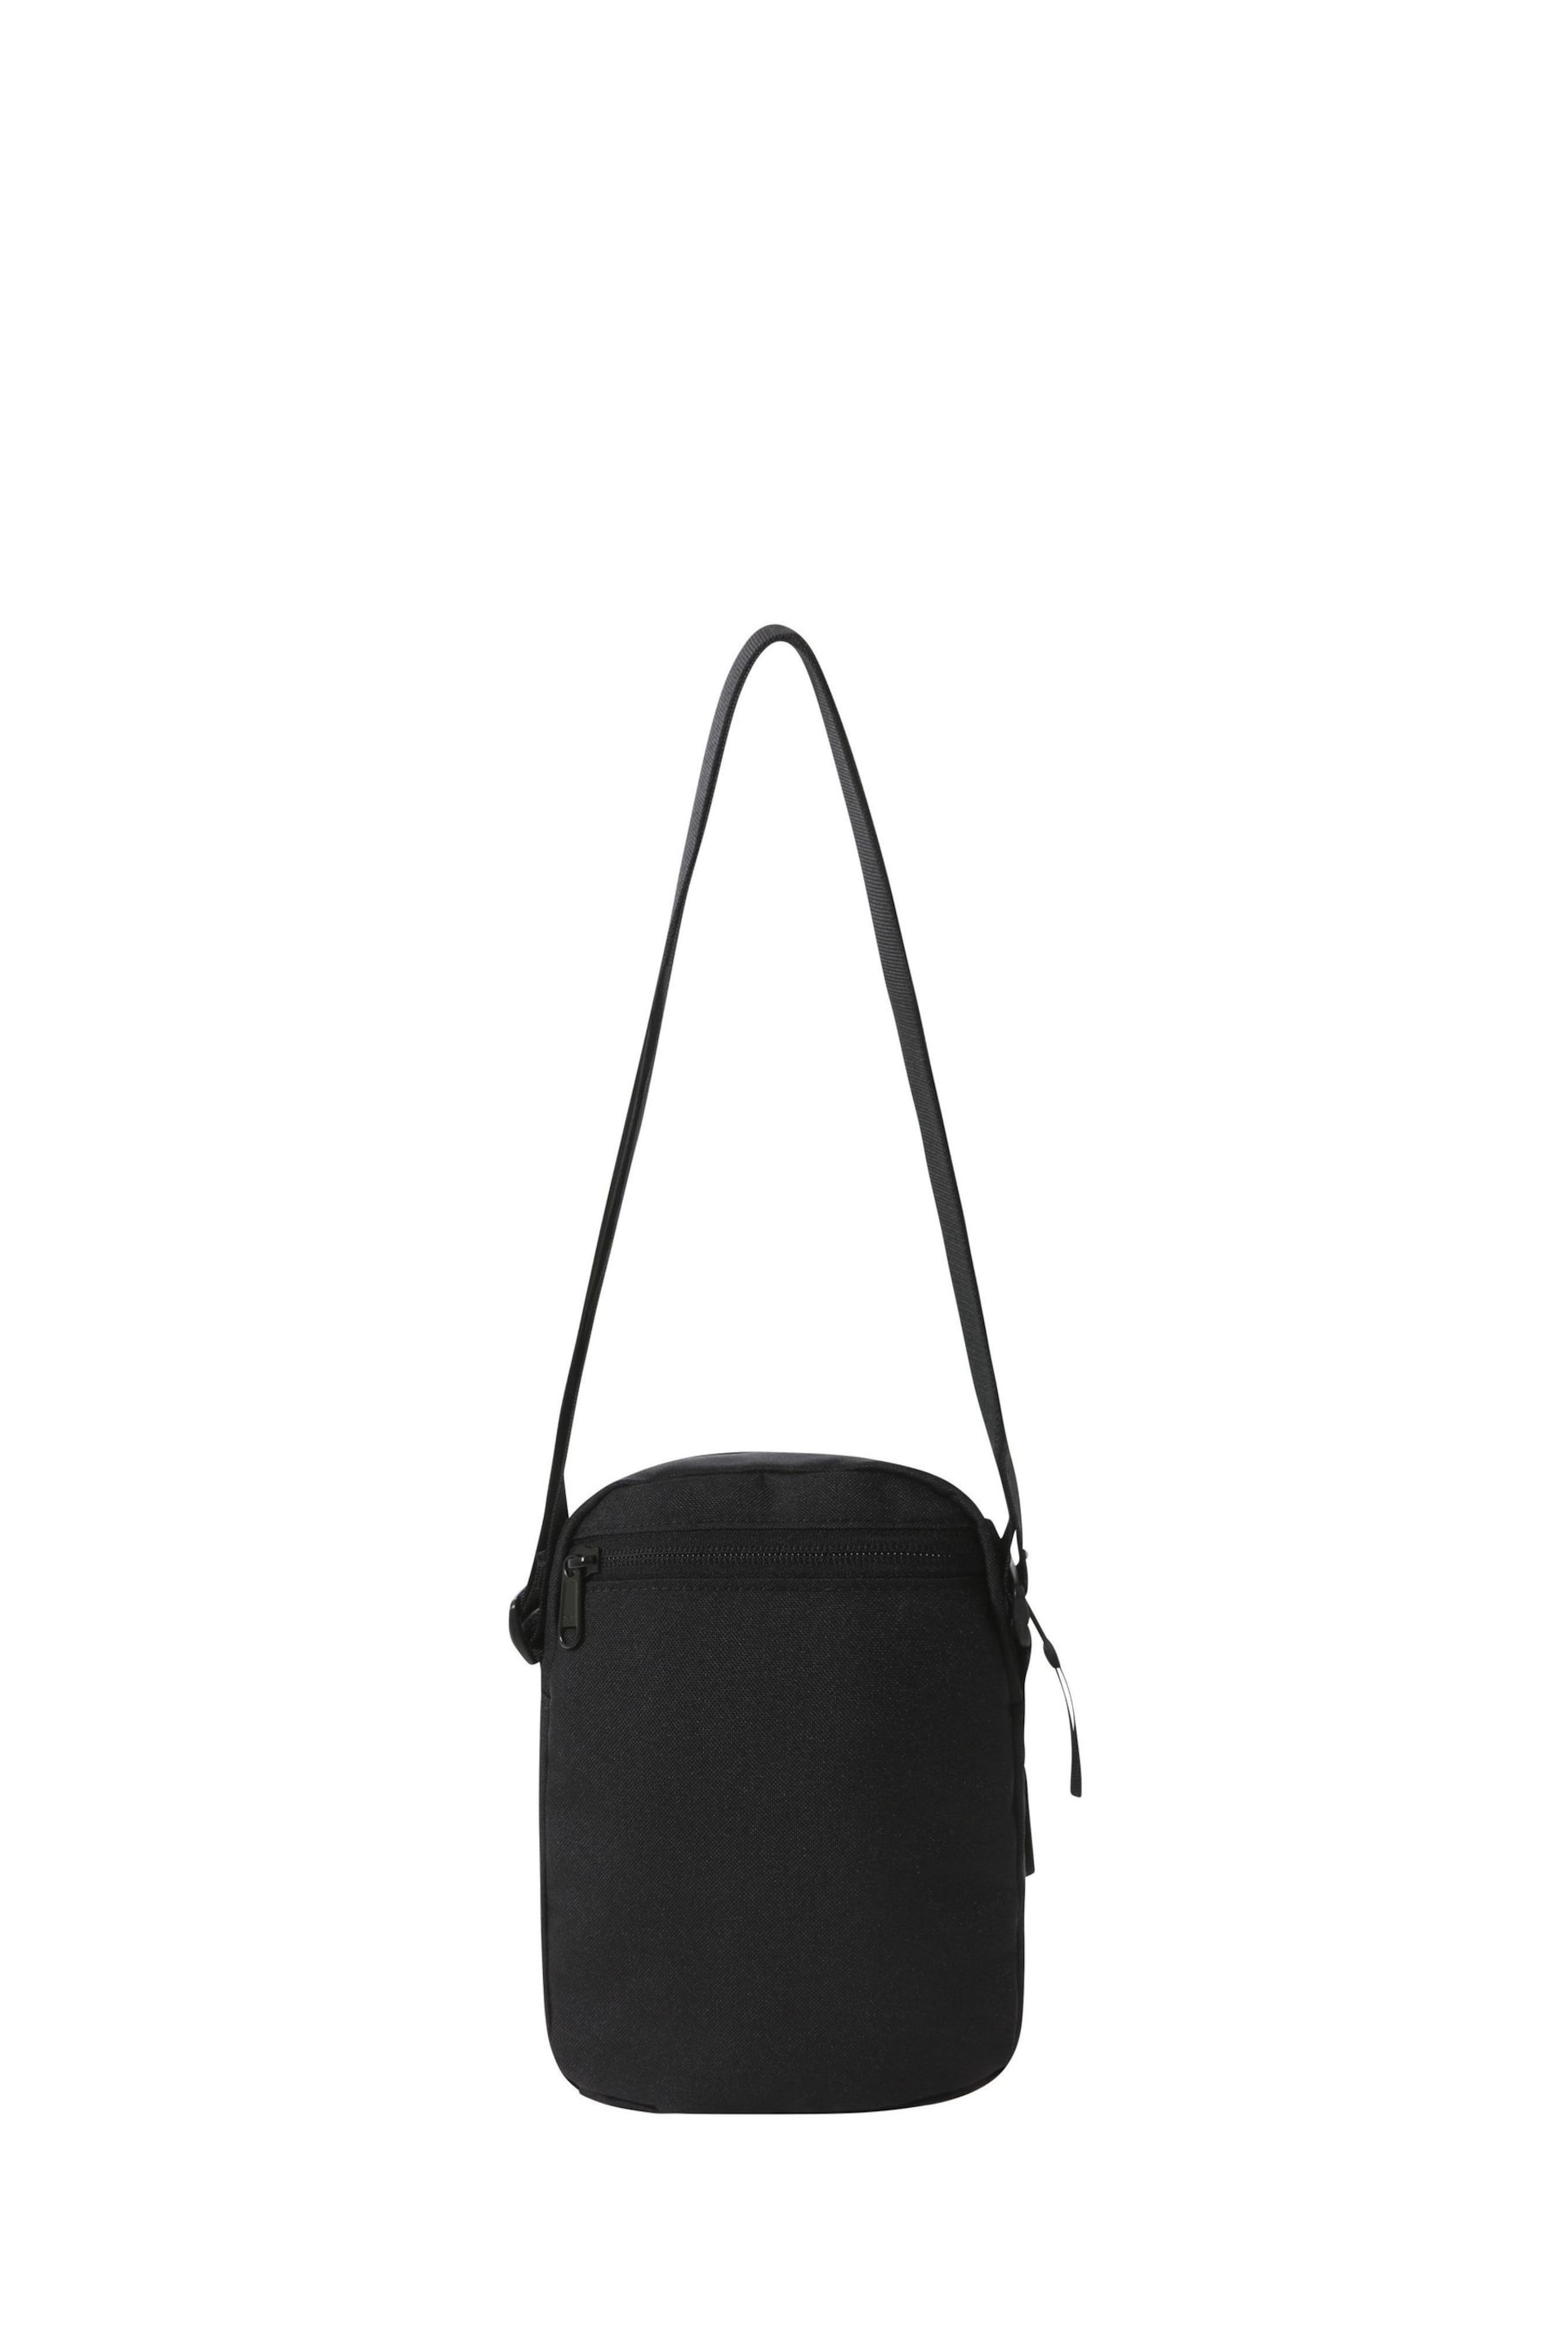 The North Face Black Jester Crossbody Bag - Image 3 of 3